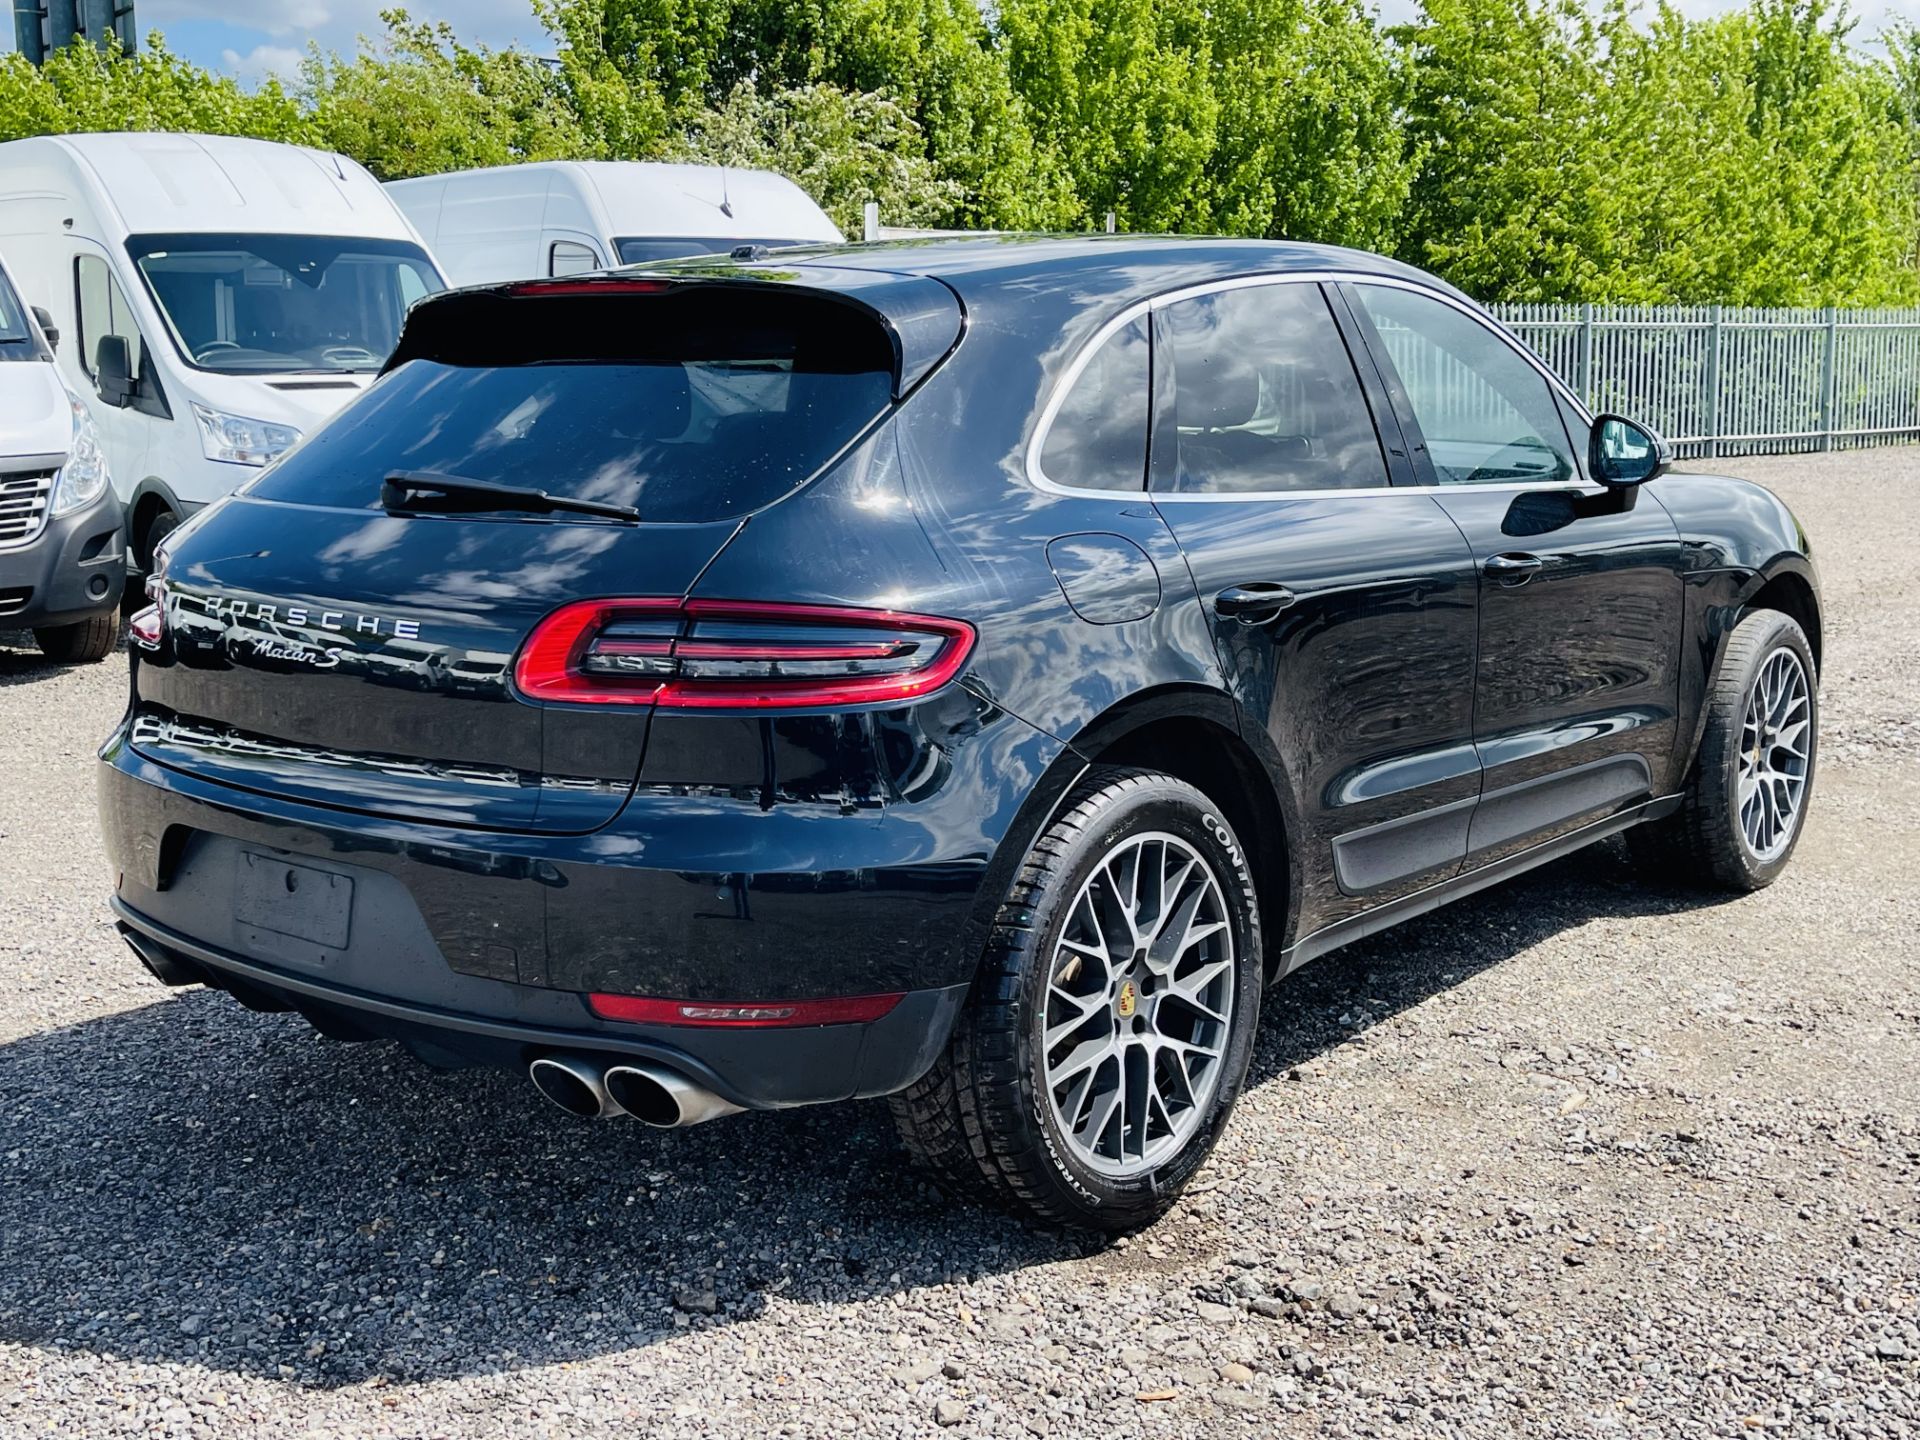 ** ON SALE ** Porsche Macan S 3.0L V6 AWD ' 2015 Year ' Sat Nav - Panoramic Roof - ULEZ Compliant - Image 12 of 44